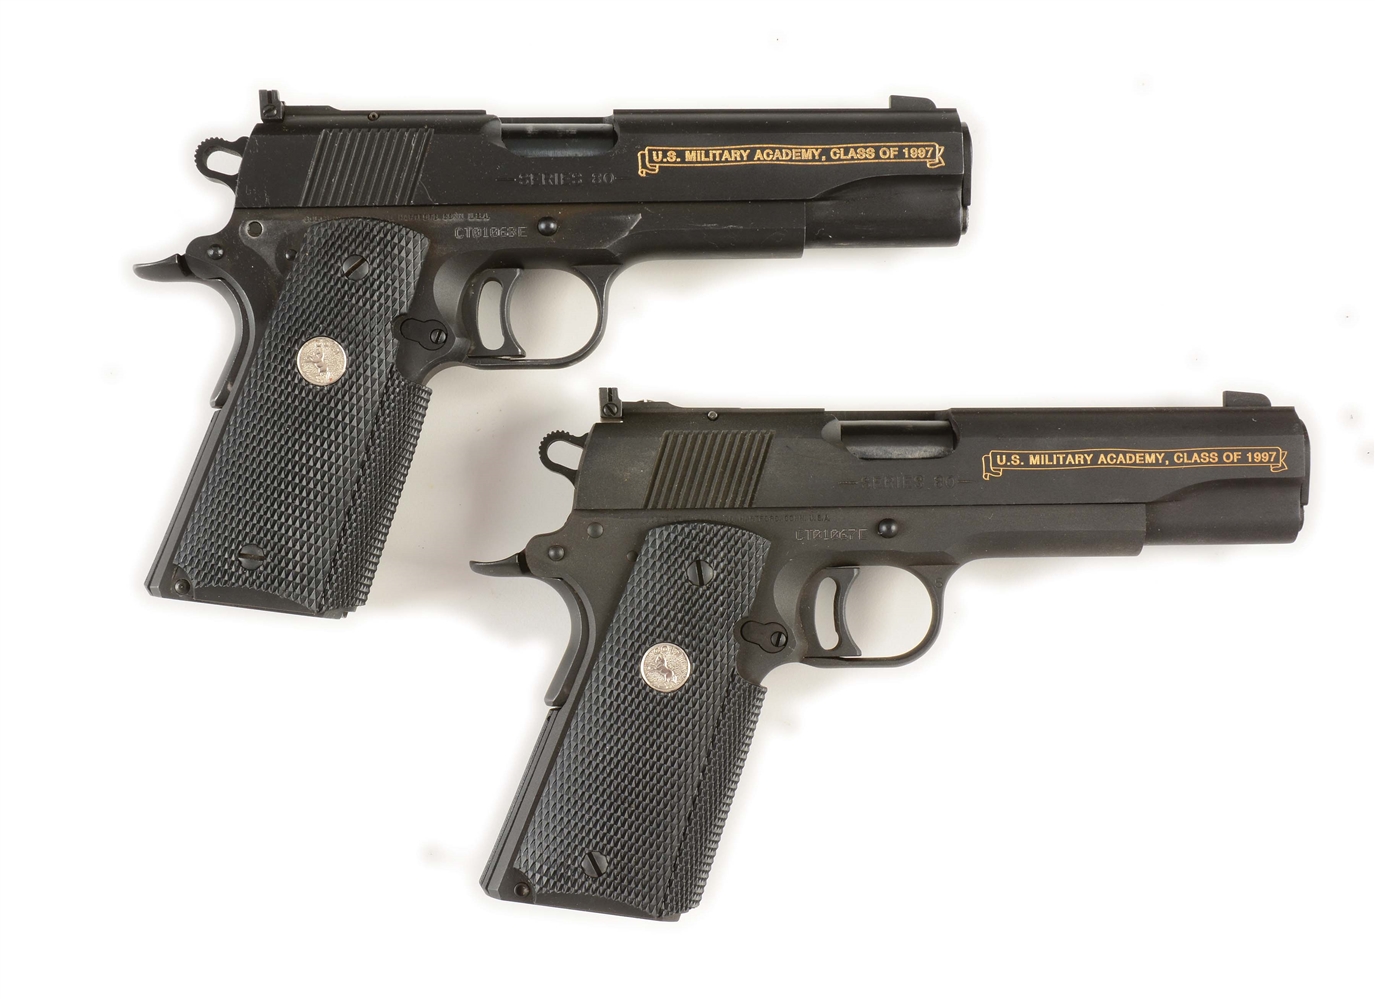 (M) PAIR OF CONSECUTIVELY NUMBERED COLT MODEL 1911 COMBAT TARGET SEMI-AUTOMATIC PISTOLS FOR US MILITARY ACADEMY CLASS OF 1997.